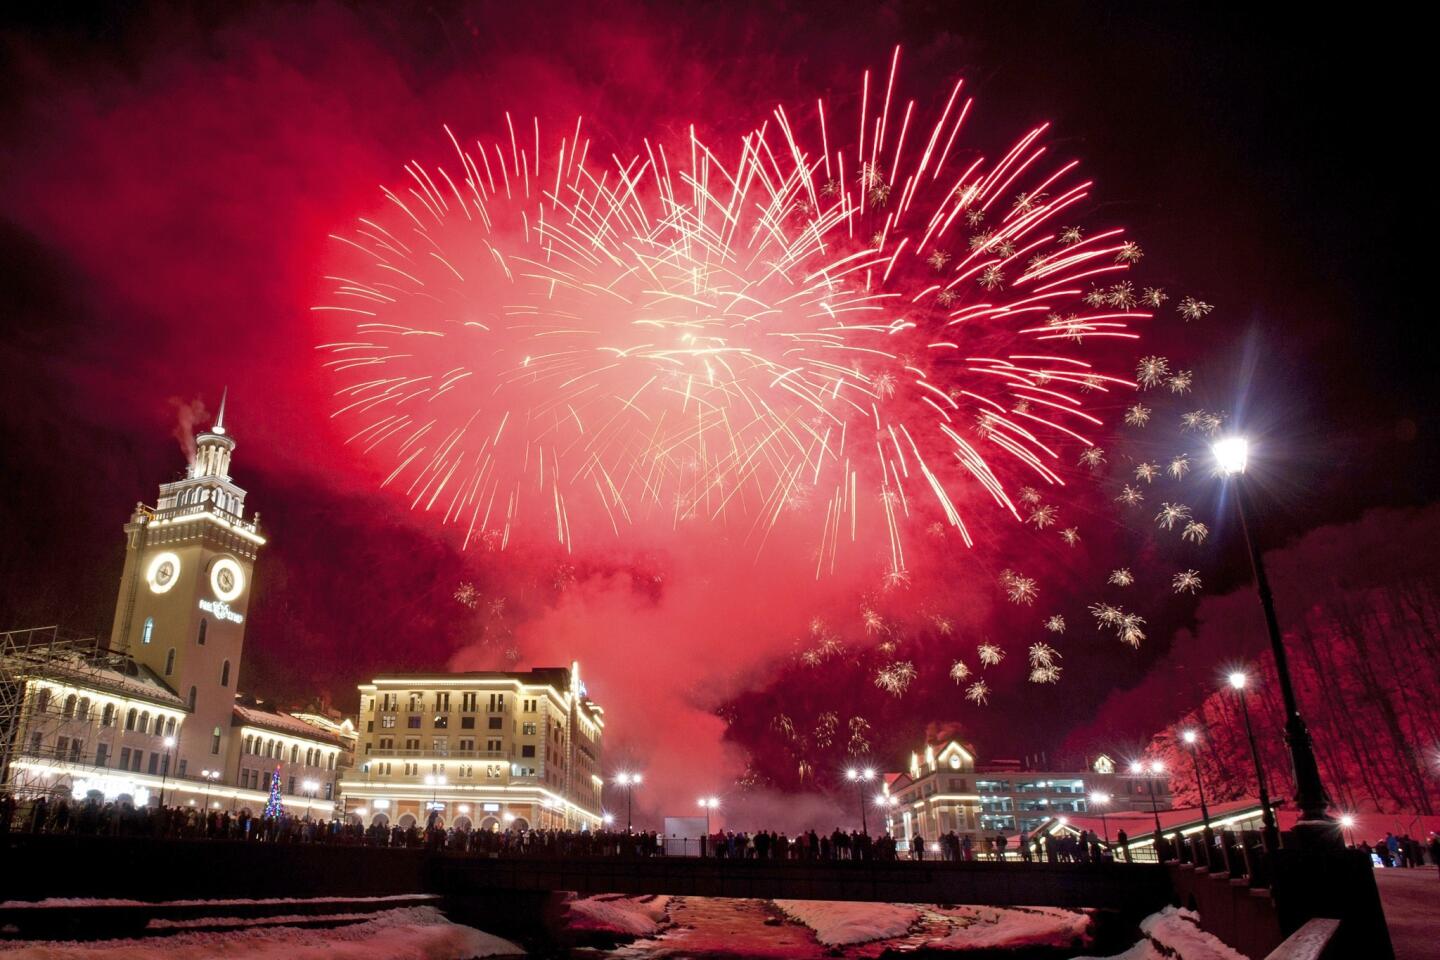 New Year's celebration in Russia